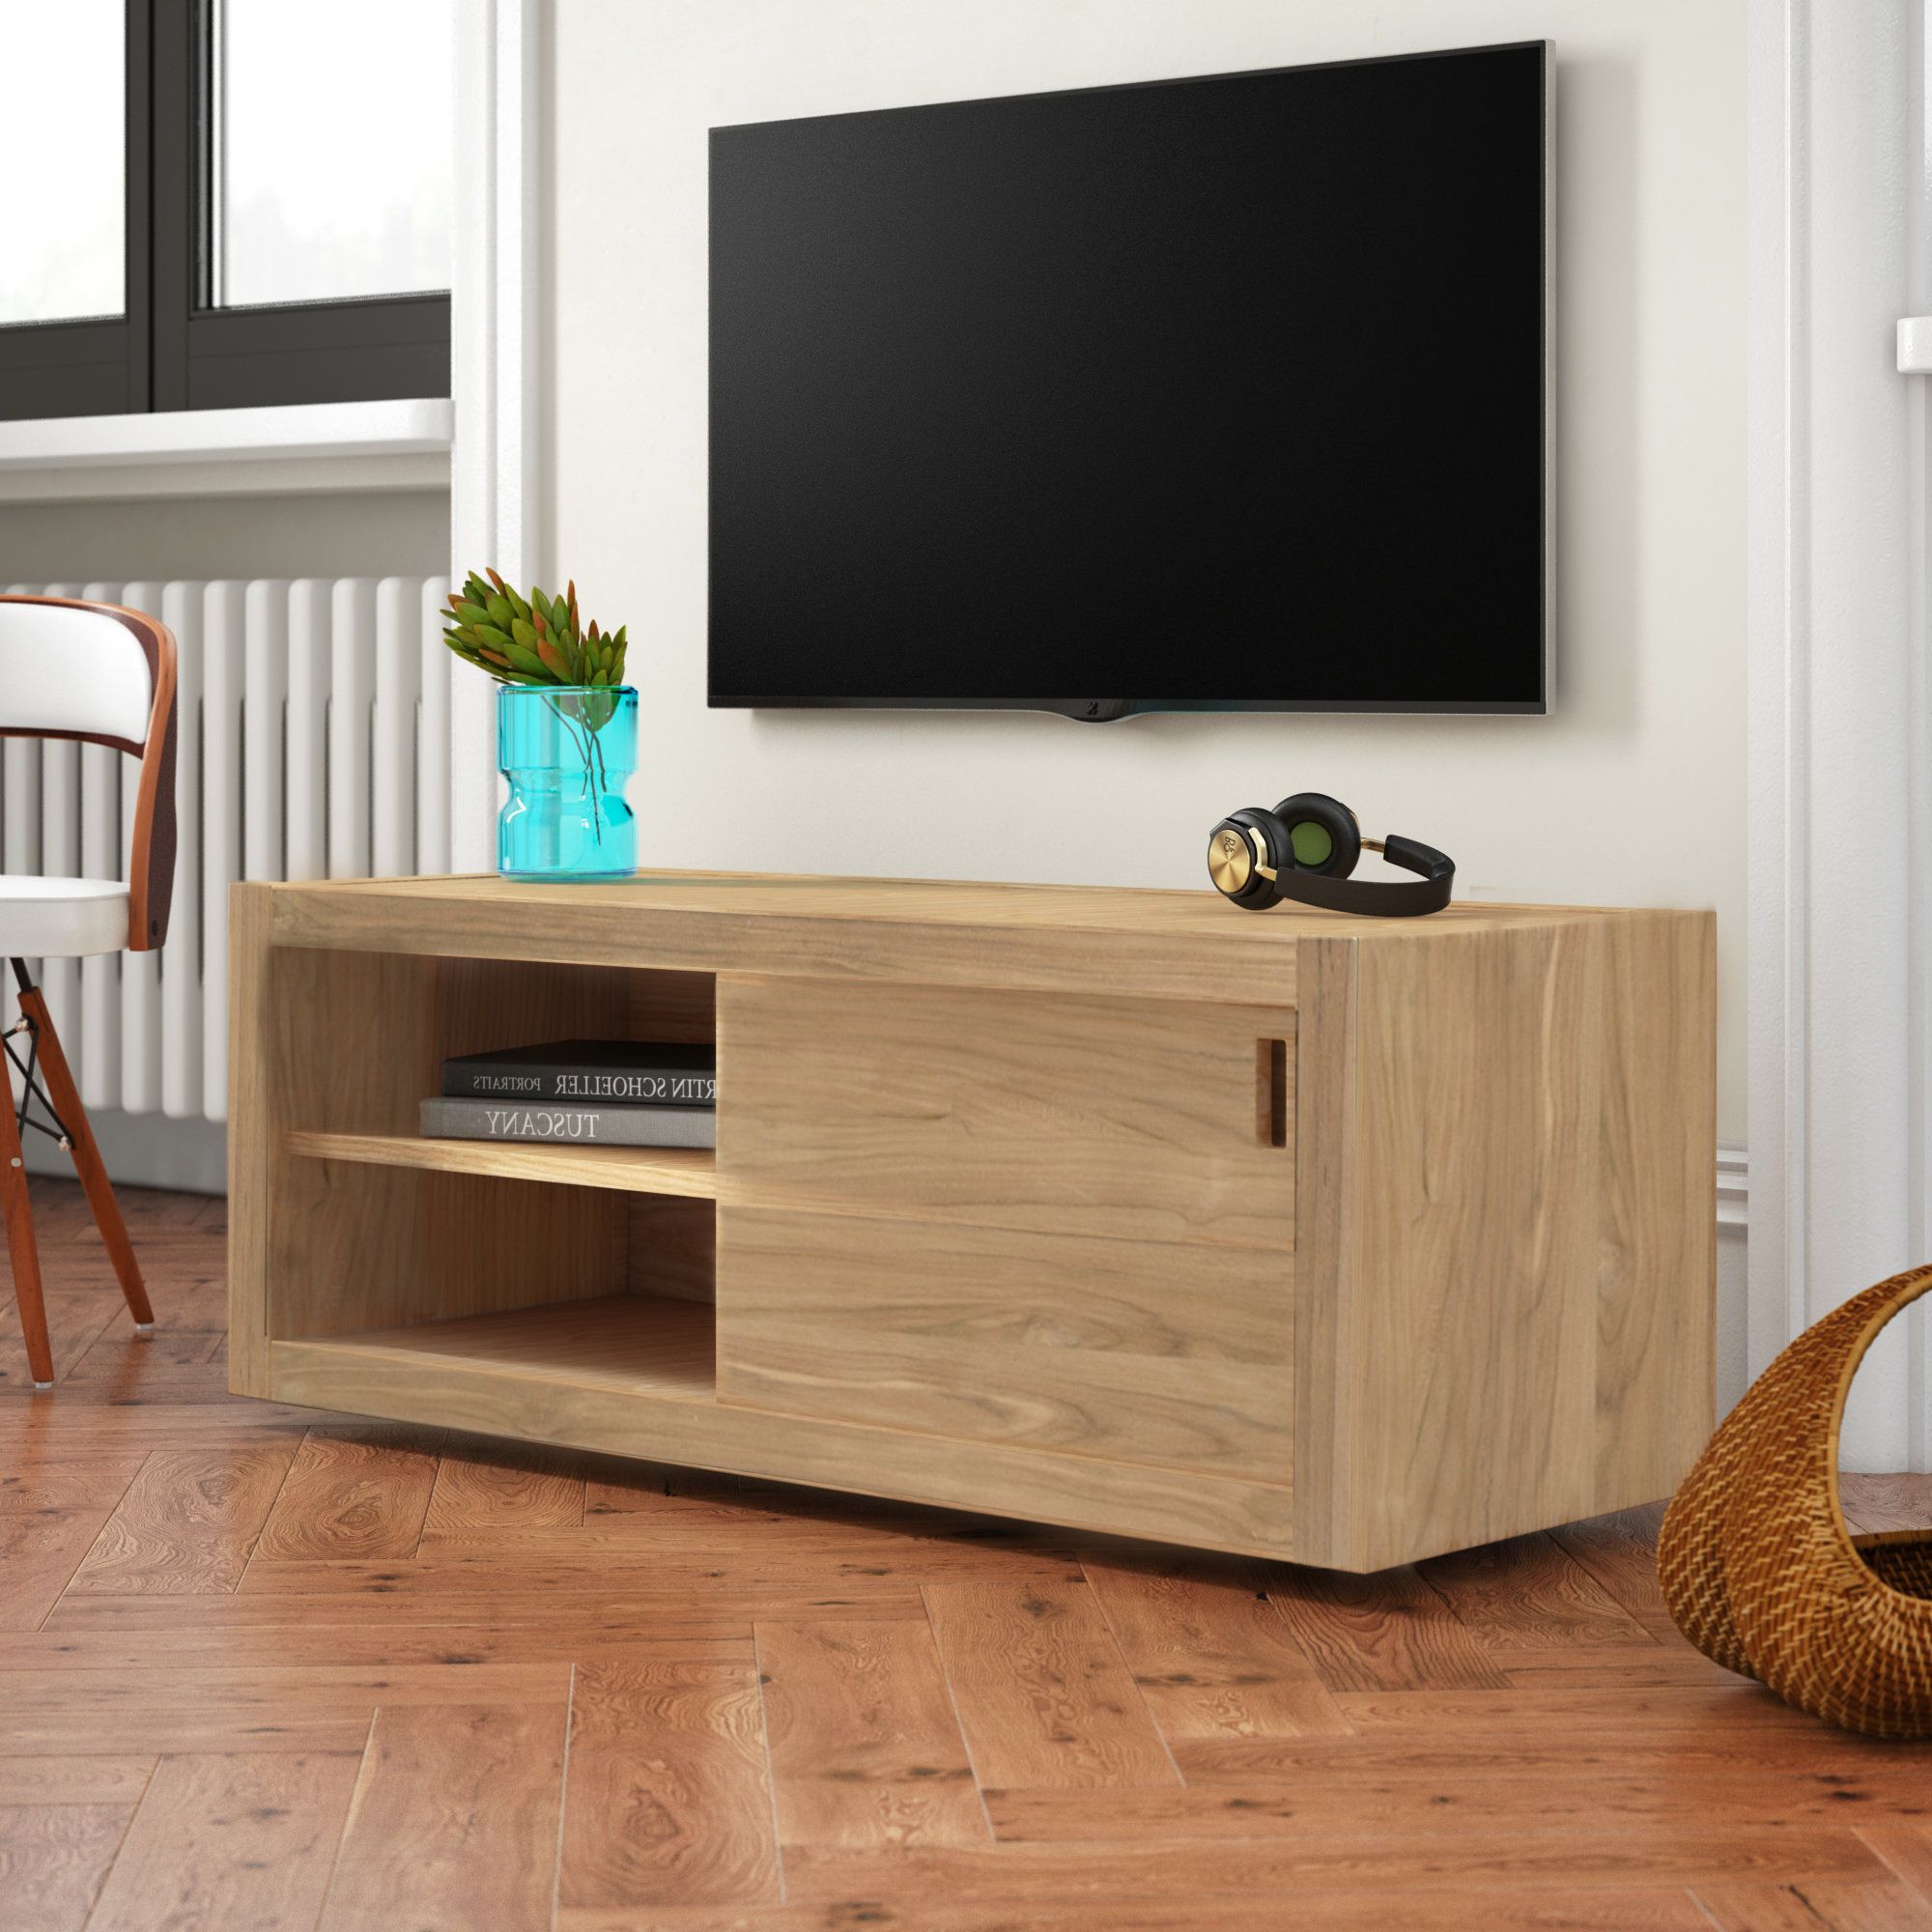 Solid Wood Modern Tv Stands You'll Love | Wayfair.co (View 18 of 20)